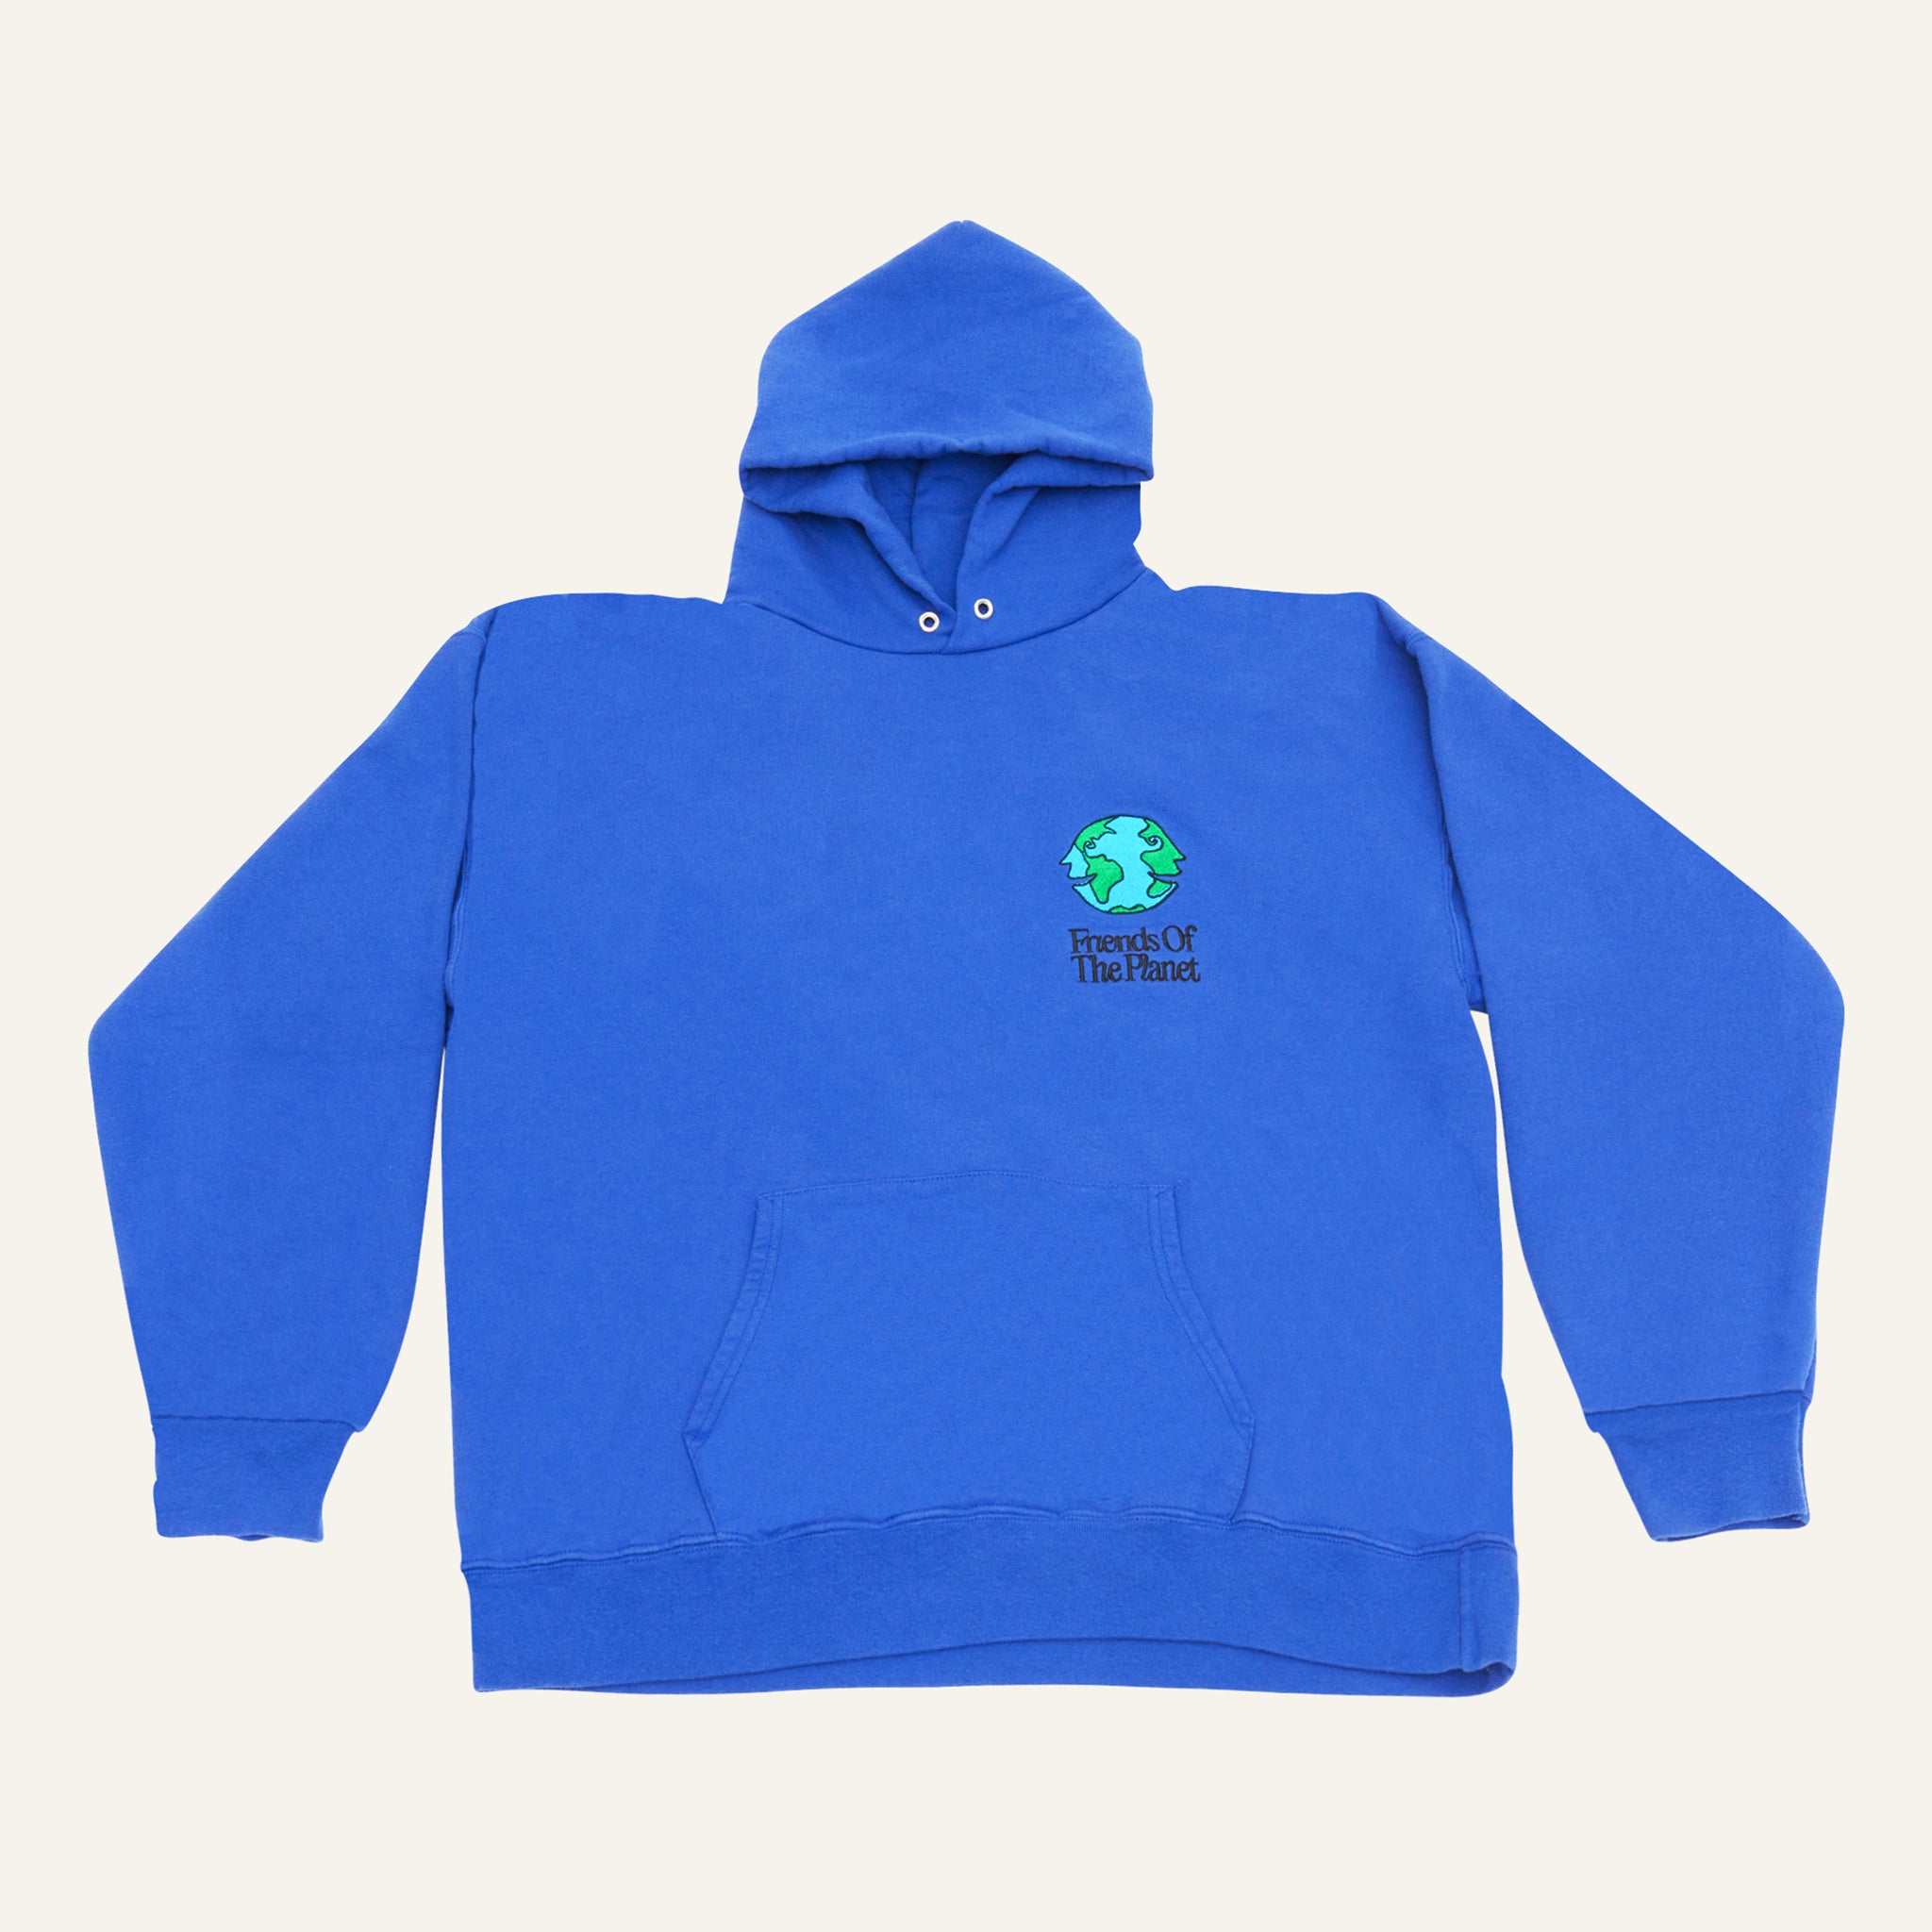 Upcycled Hoodie in Ocean Blue ☯ Size M/L